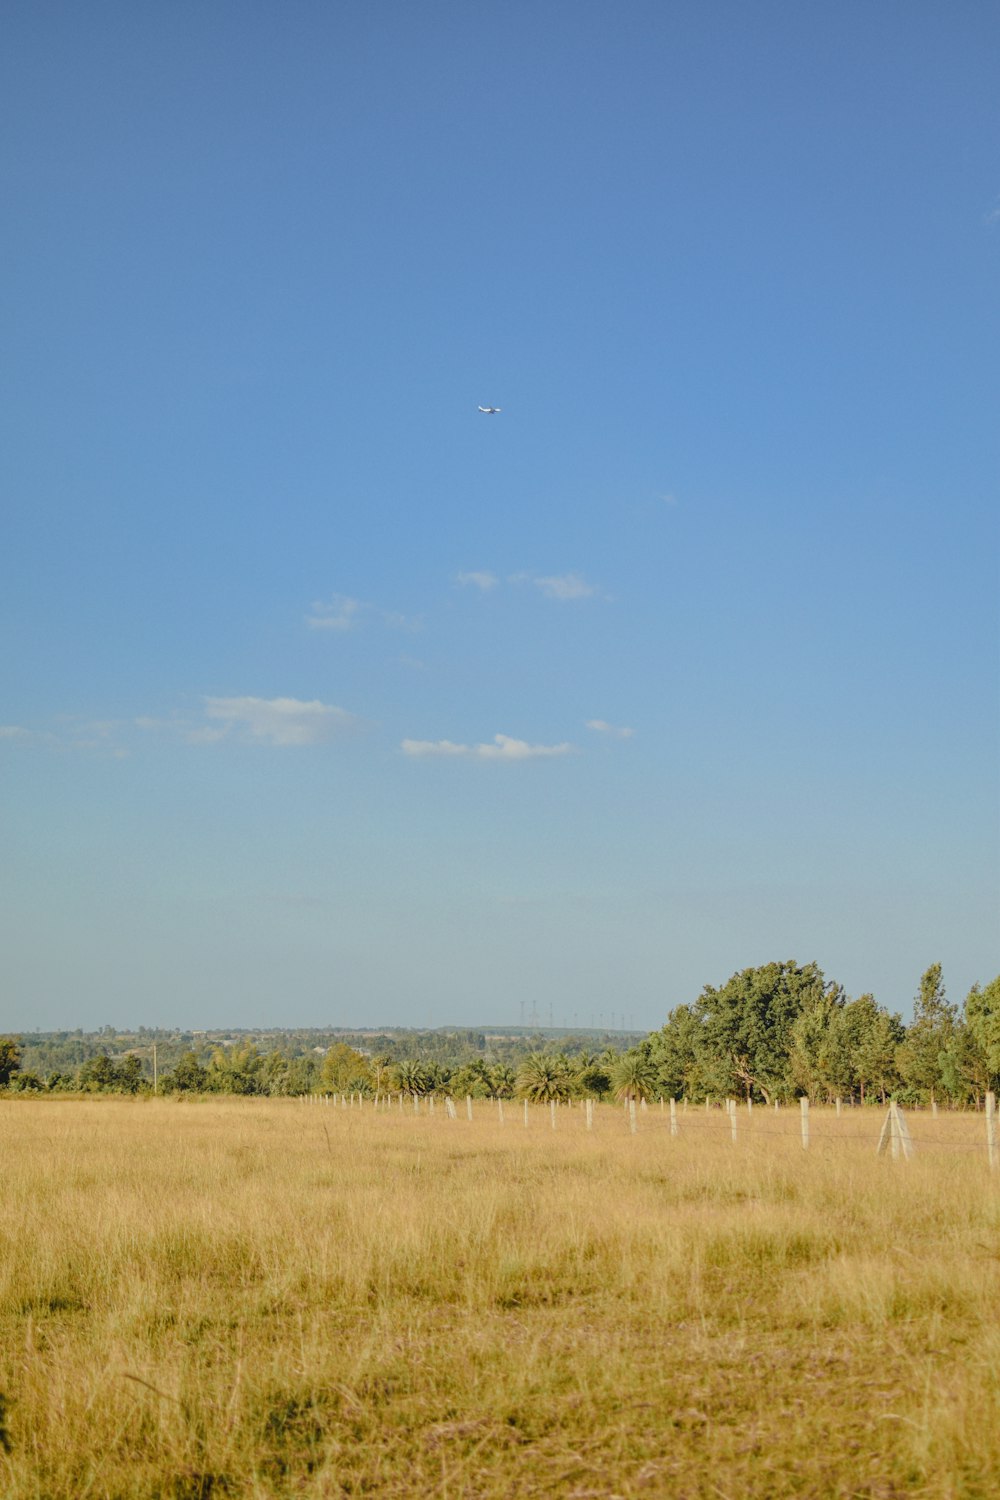 a large open field with trees and a plane in the sky